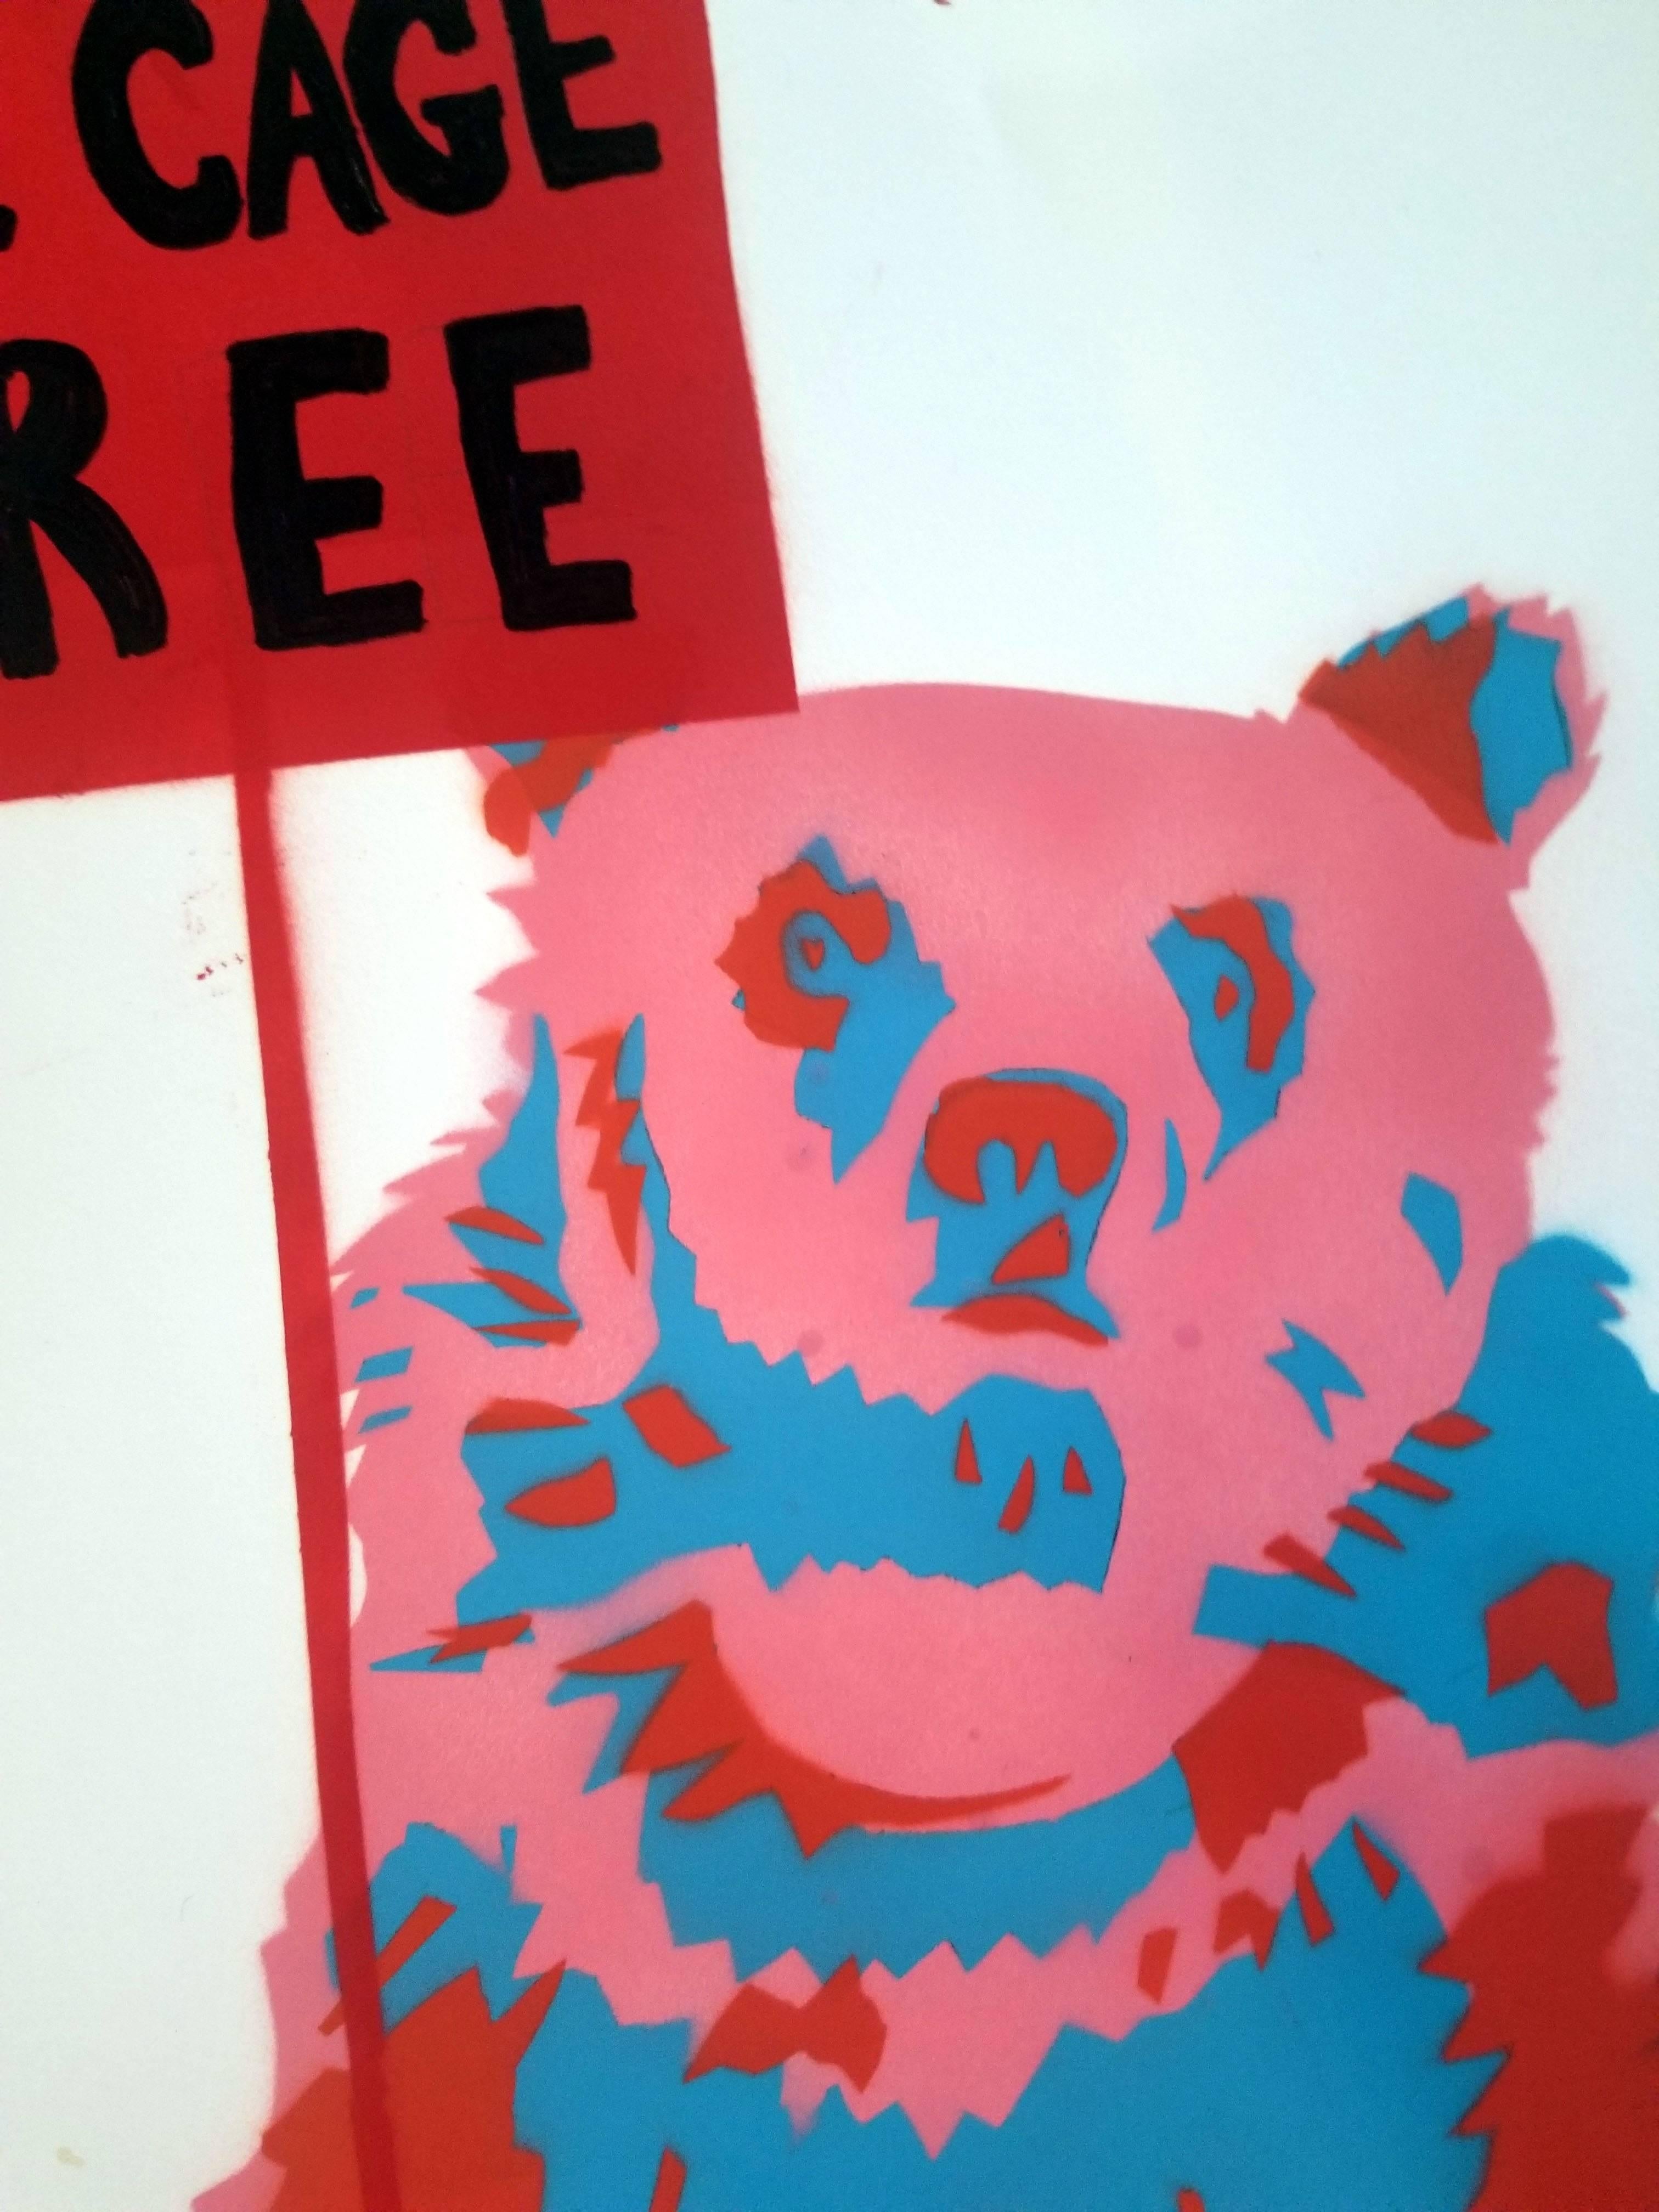 Grizzly: Be Cage Free - Contemporary Mixed Media Art by K.K.